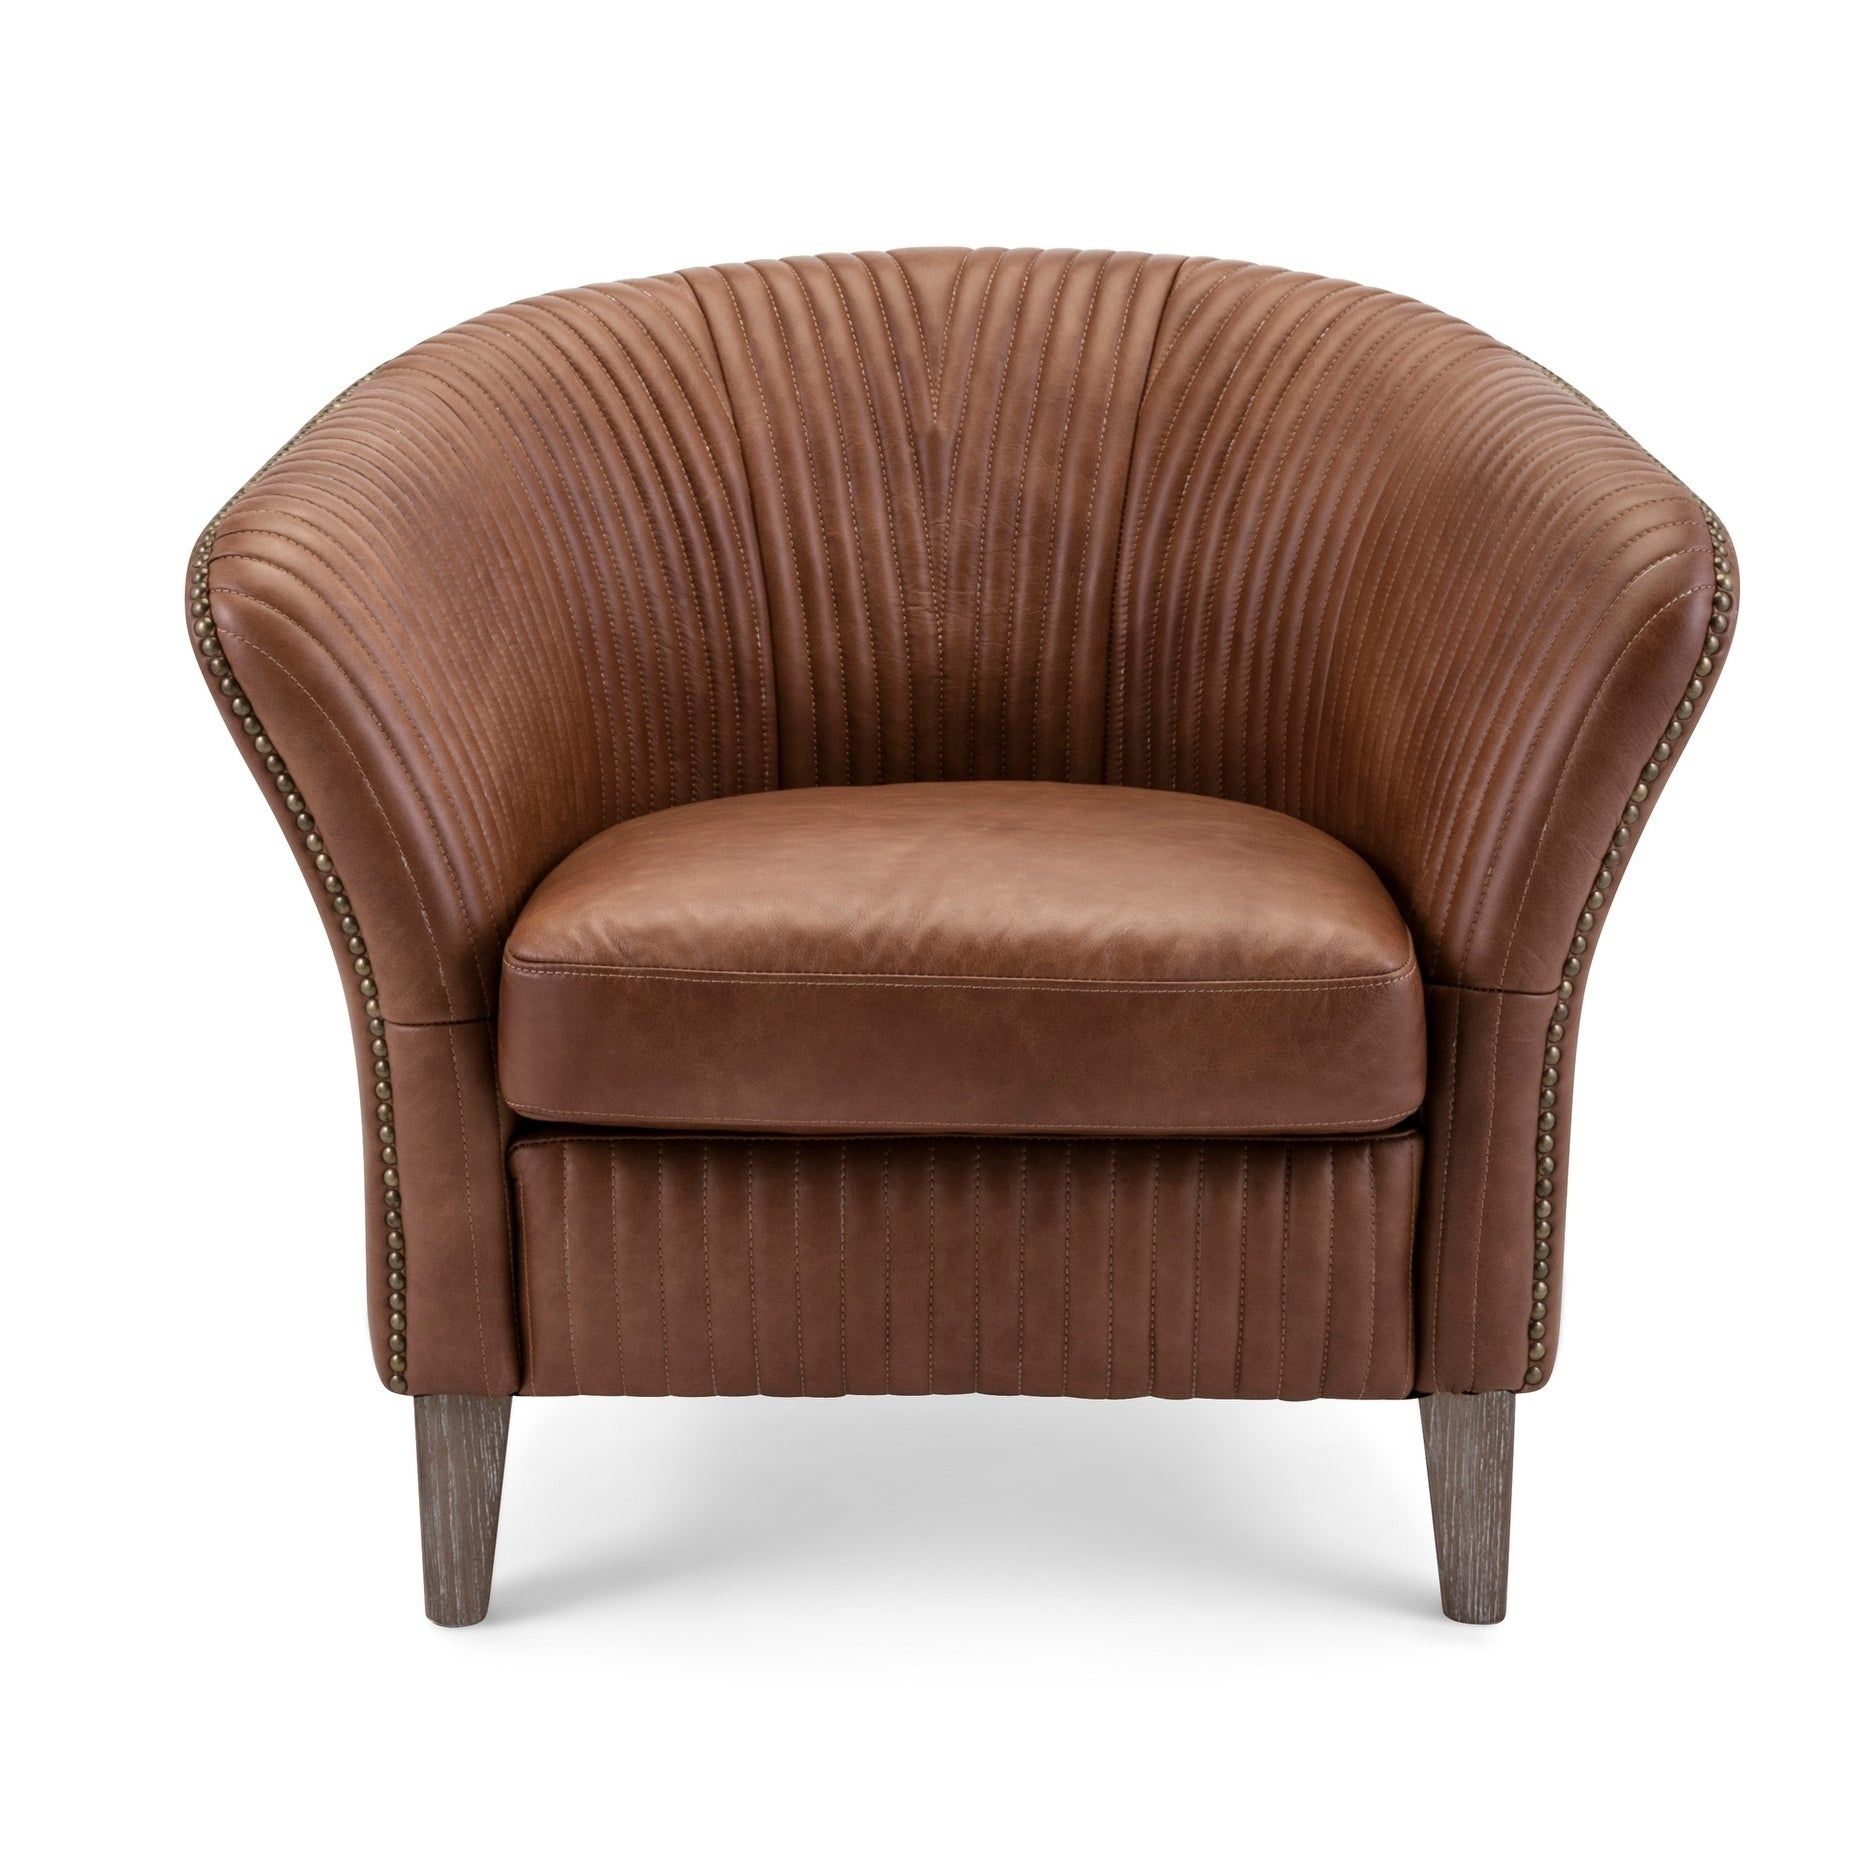 Wagner Brown Leather Barrel Chair For Danow Polyester Barrel Chairs (View 14 of 15)